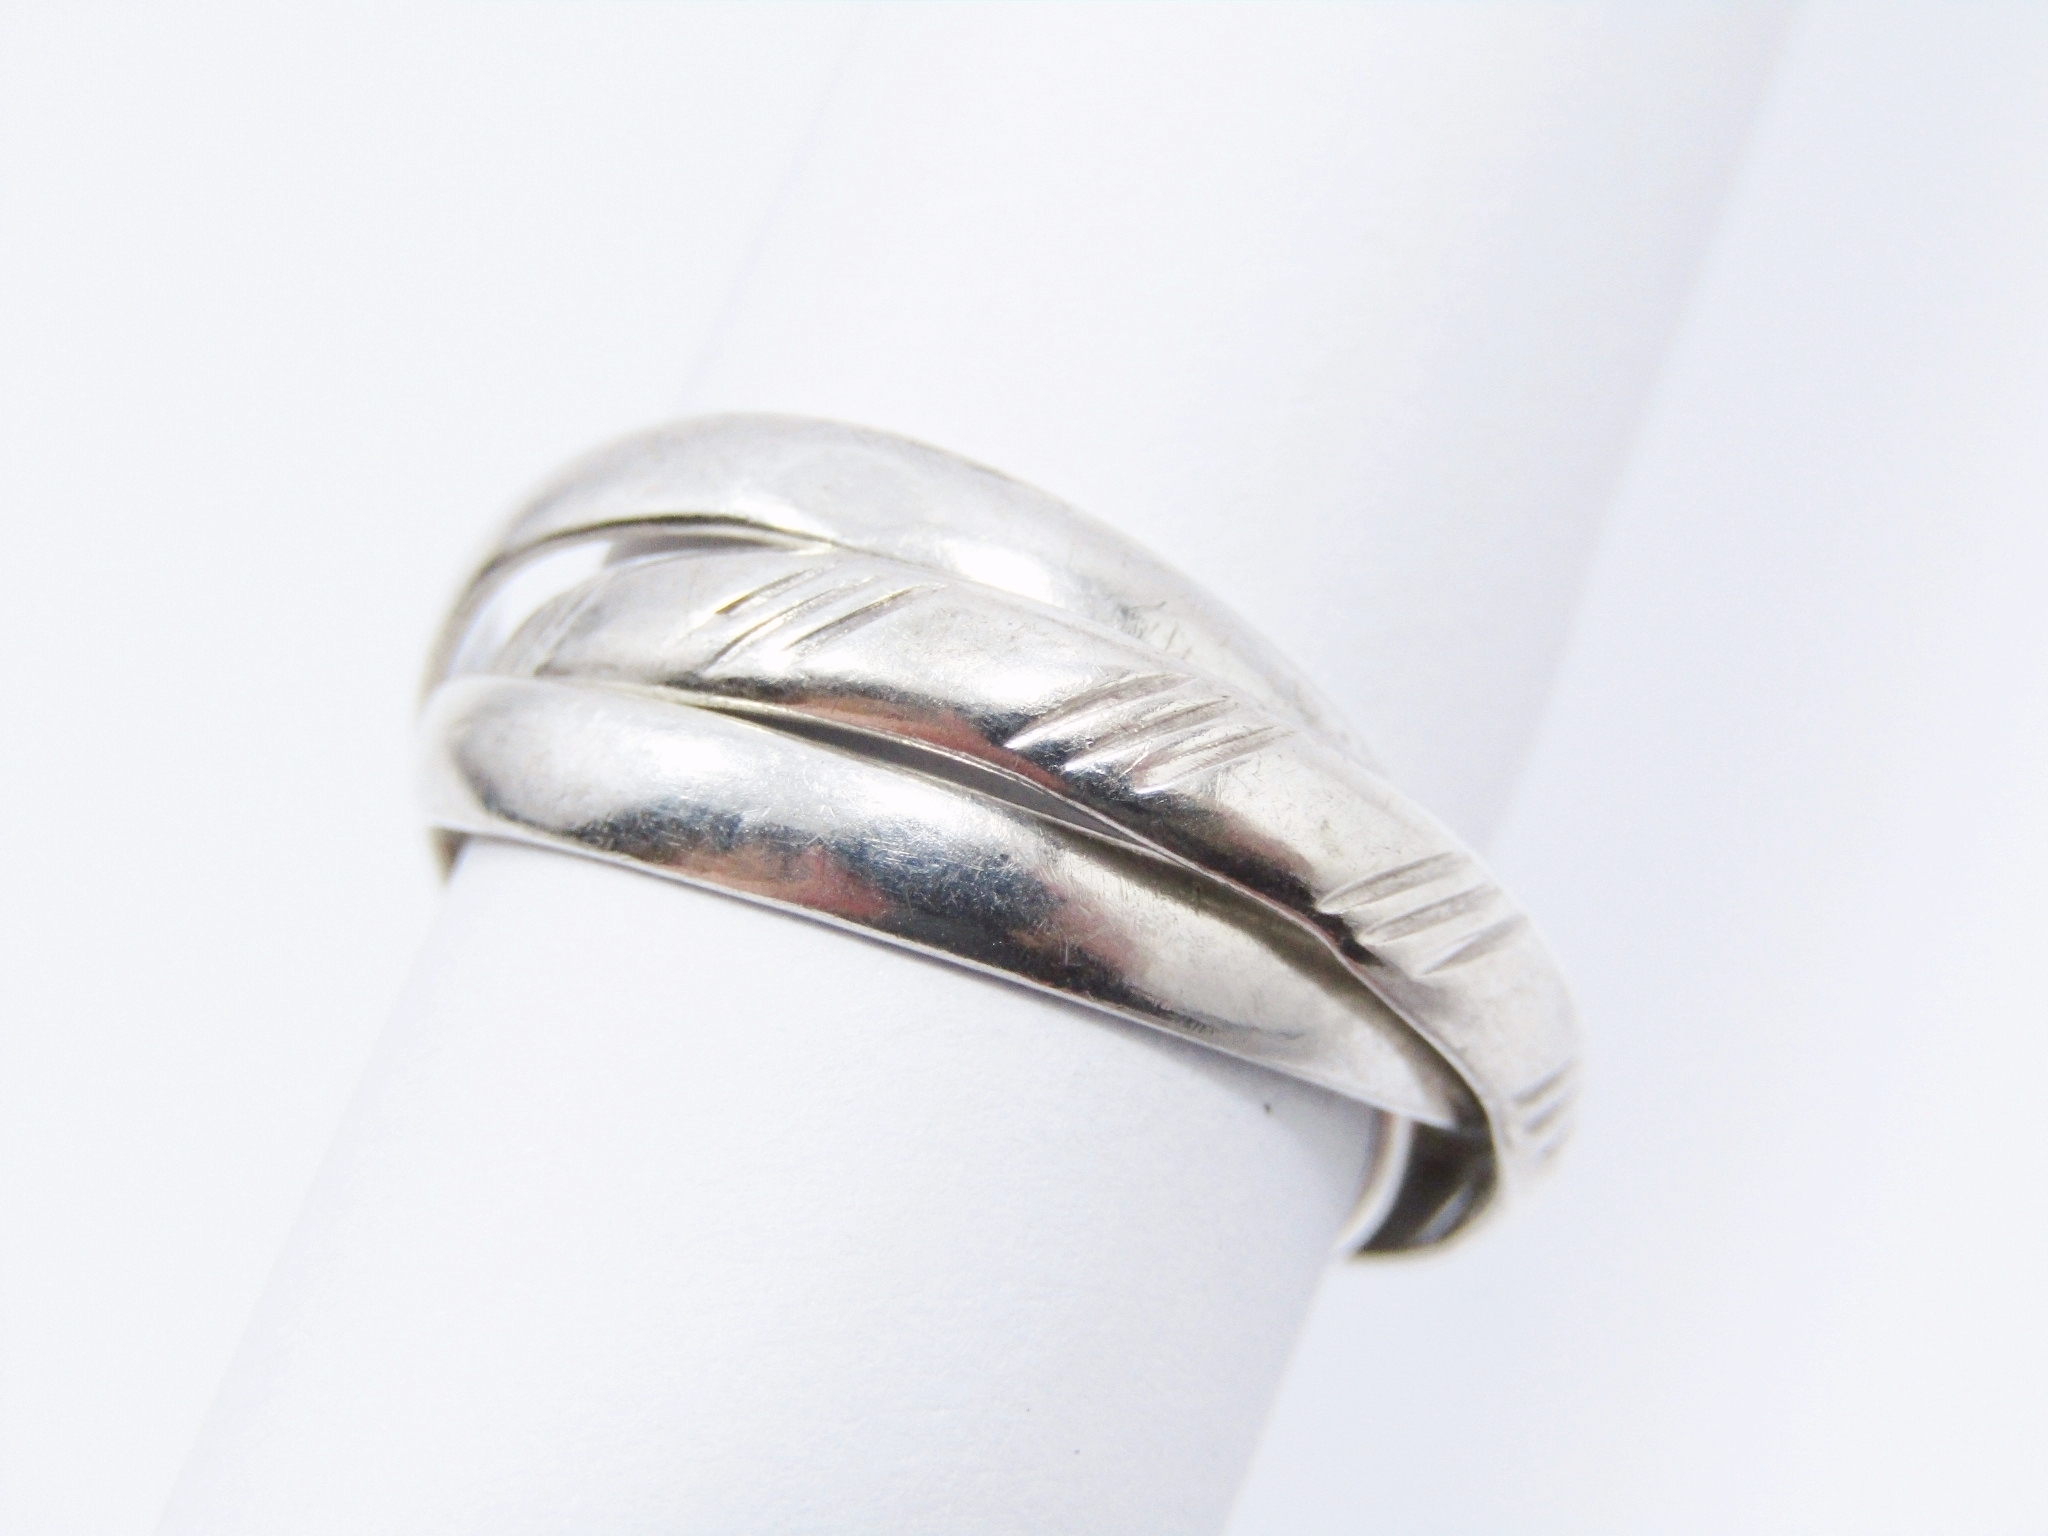 A Lovely Russian Wedding Band in Sterling Silver.